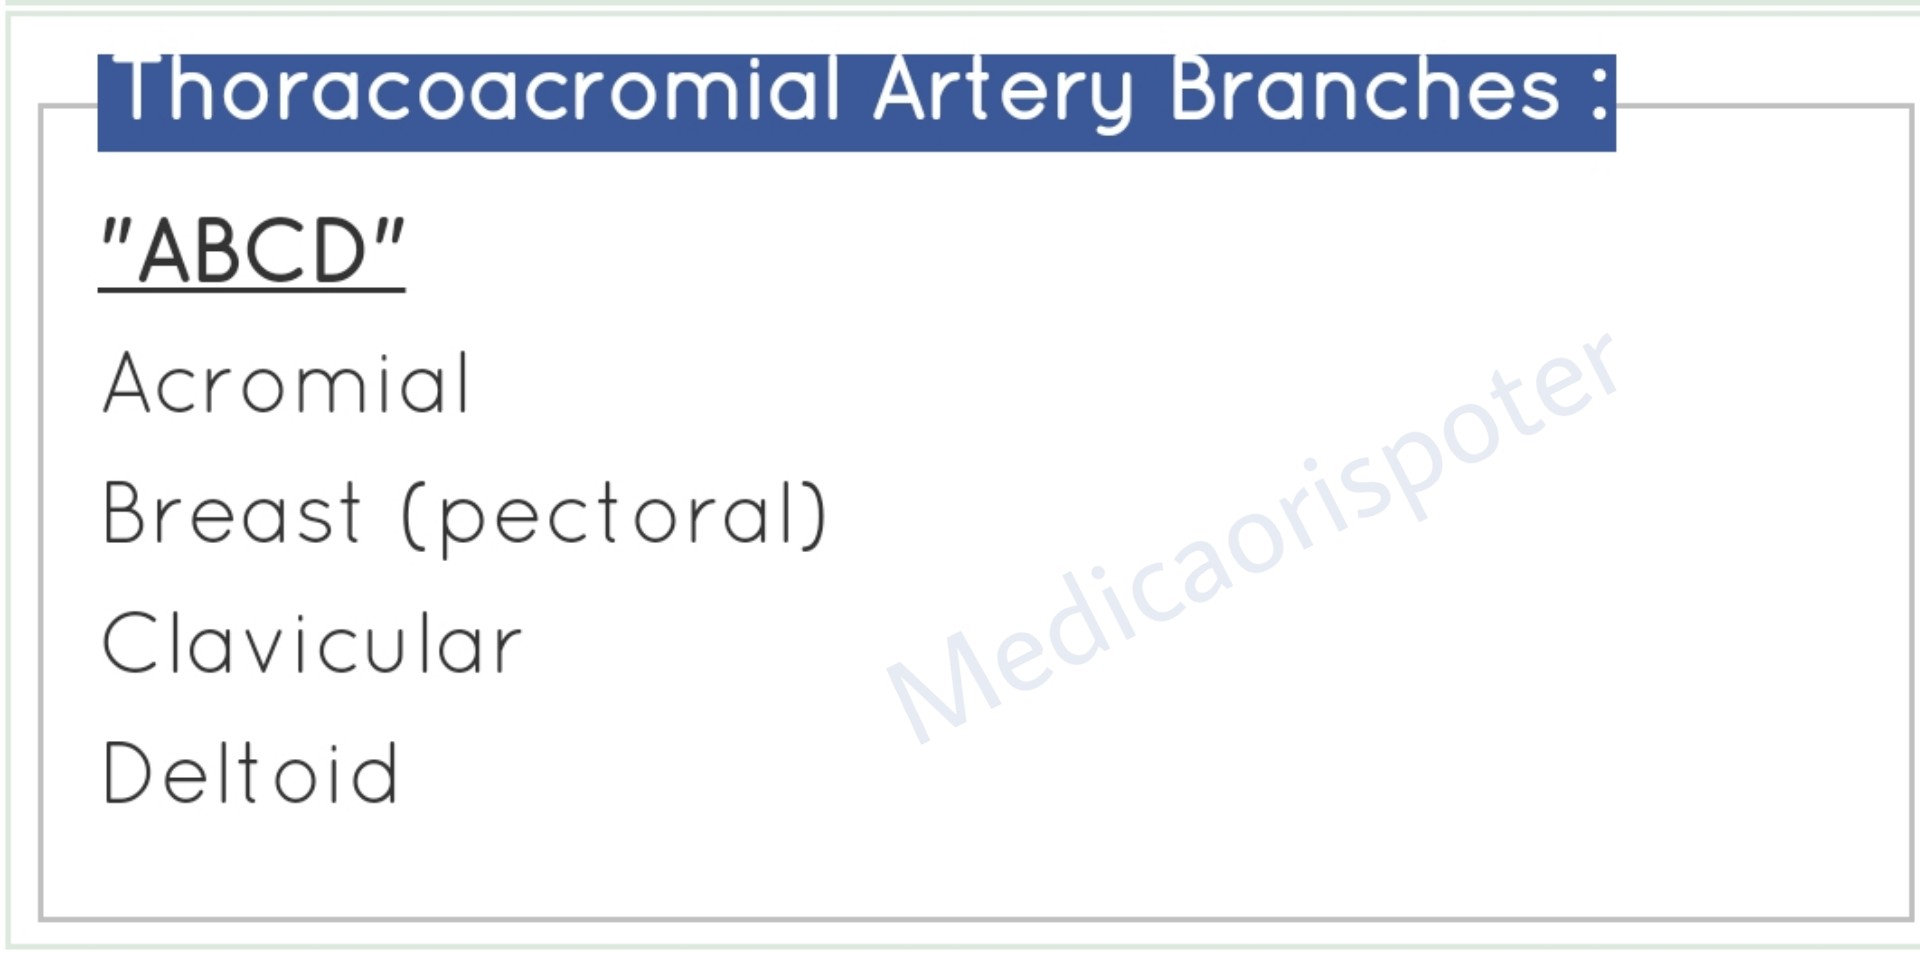 Branches of Thoracoacromial Artery